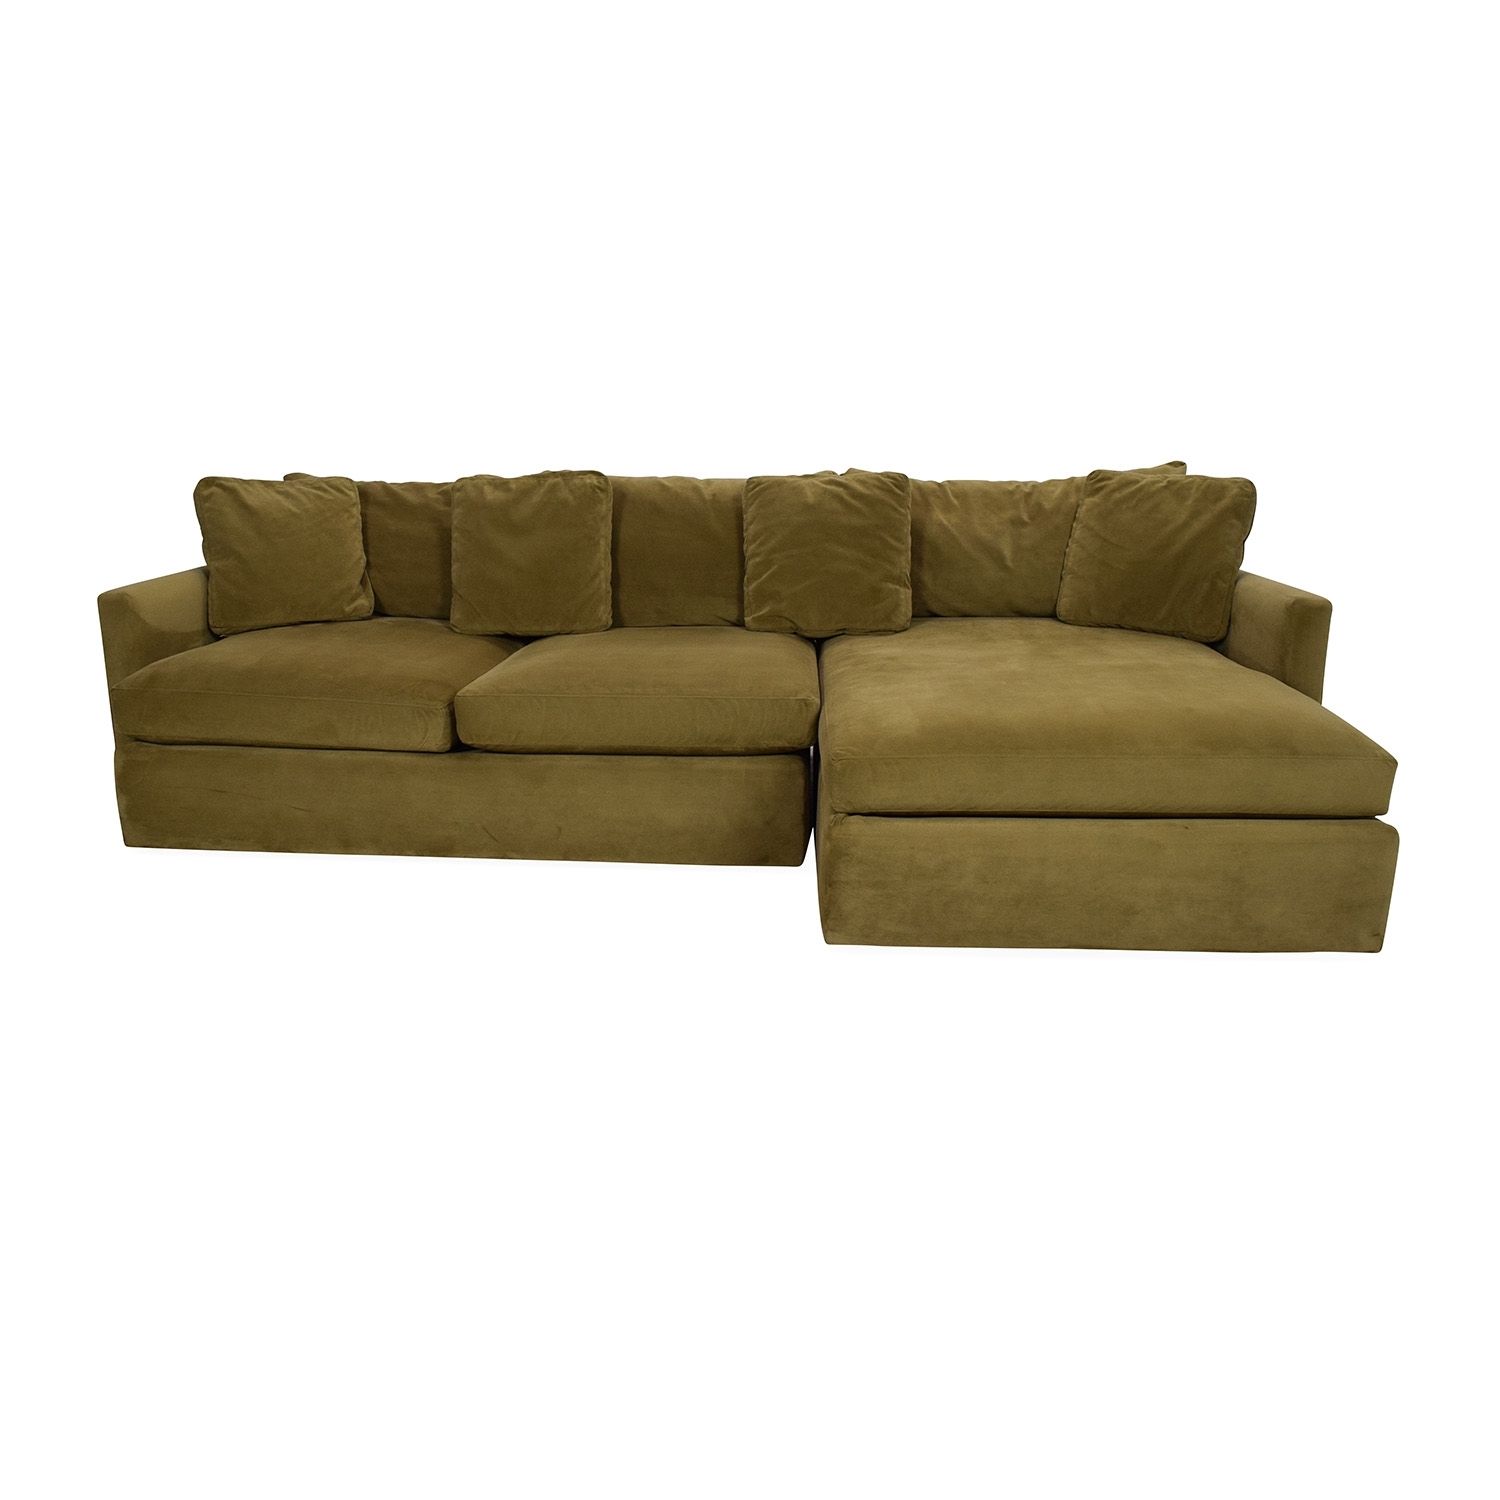 65% Off – Crate And Barrel Crate And Barrel Lounge Ii Sectional Sofa Pertaining To On Sale Sectional Sofas (View 8 of 10)